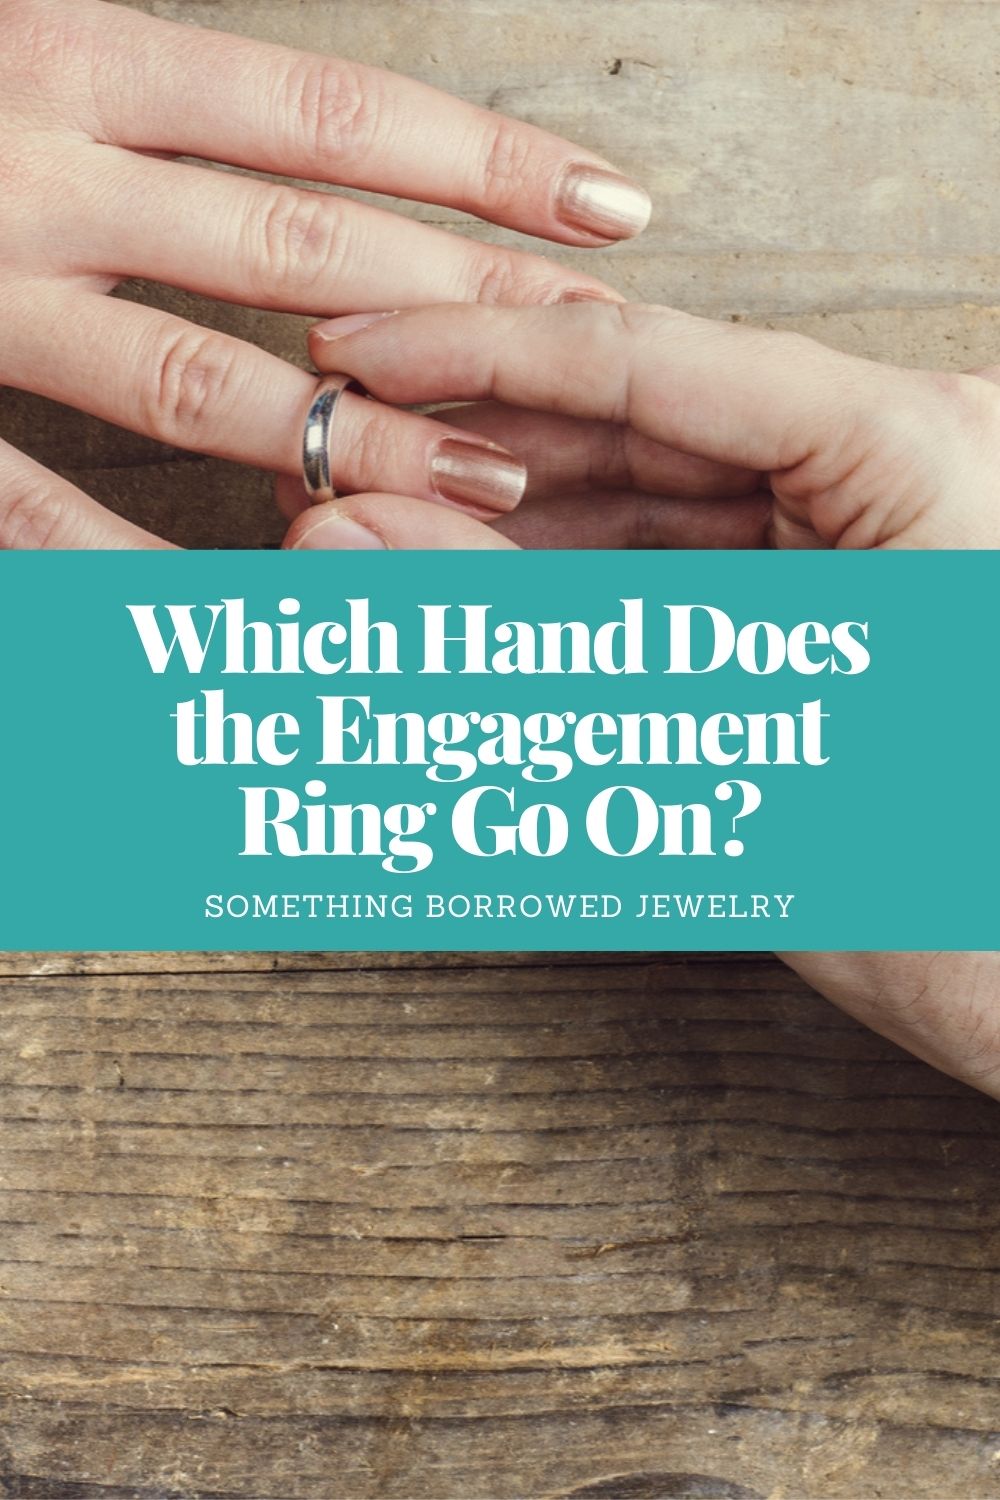 which finger does a wedding ring go on